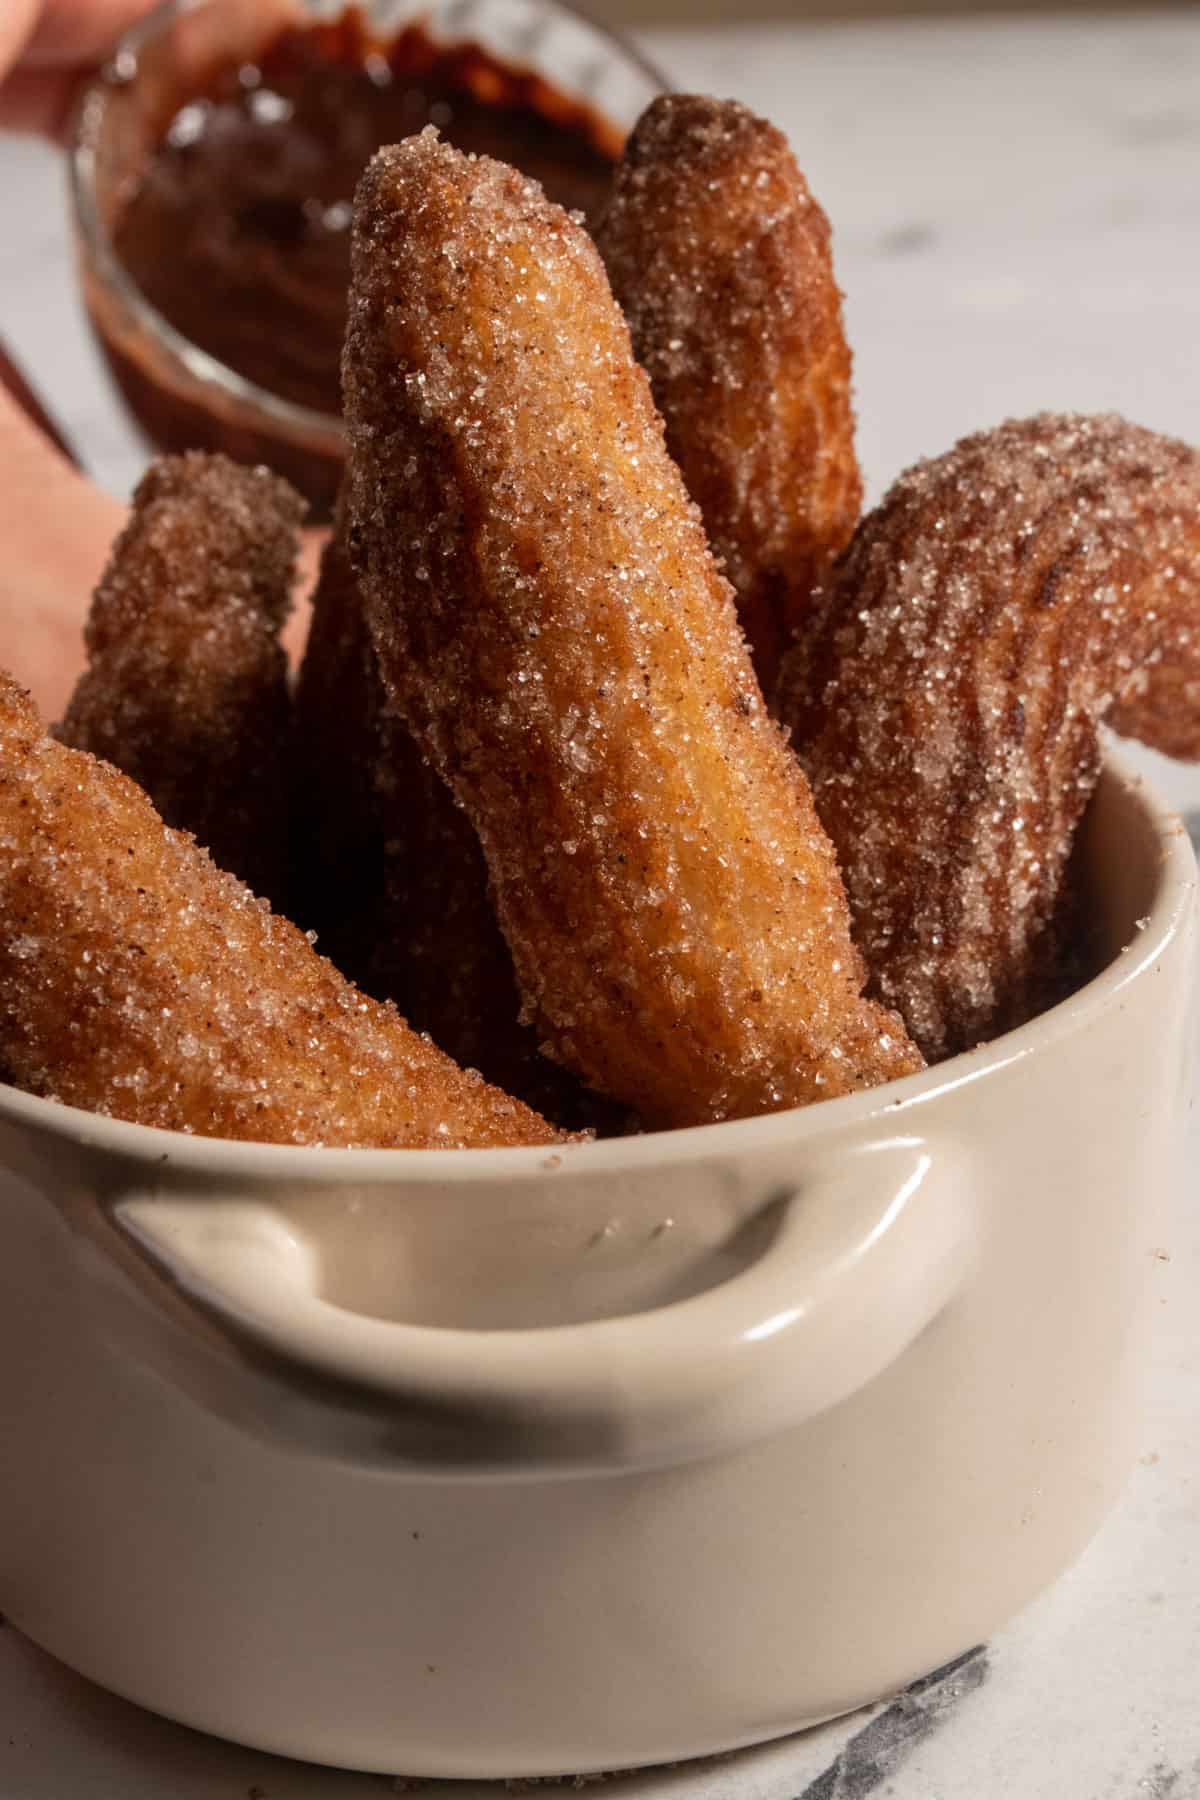 Golden brown, sugar-coated vegan churros inside a small ramekin. The chocolate dip is being held in the background. 